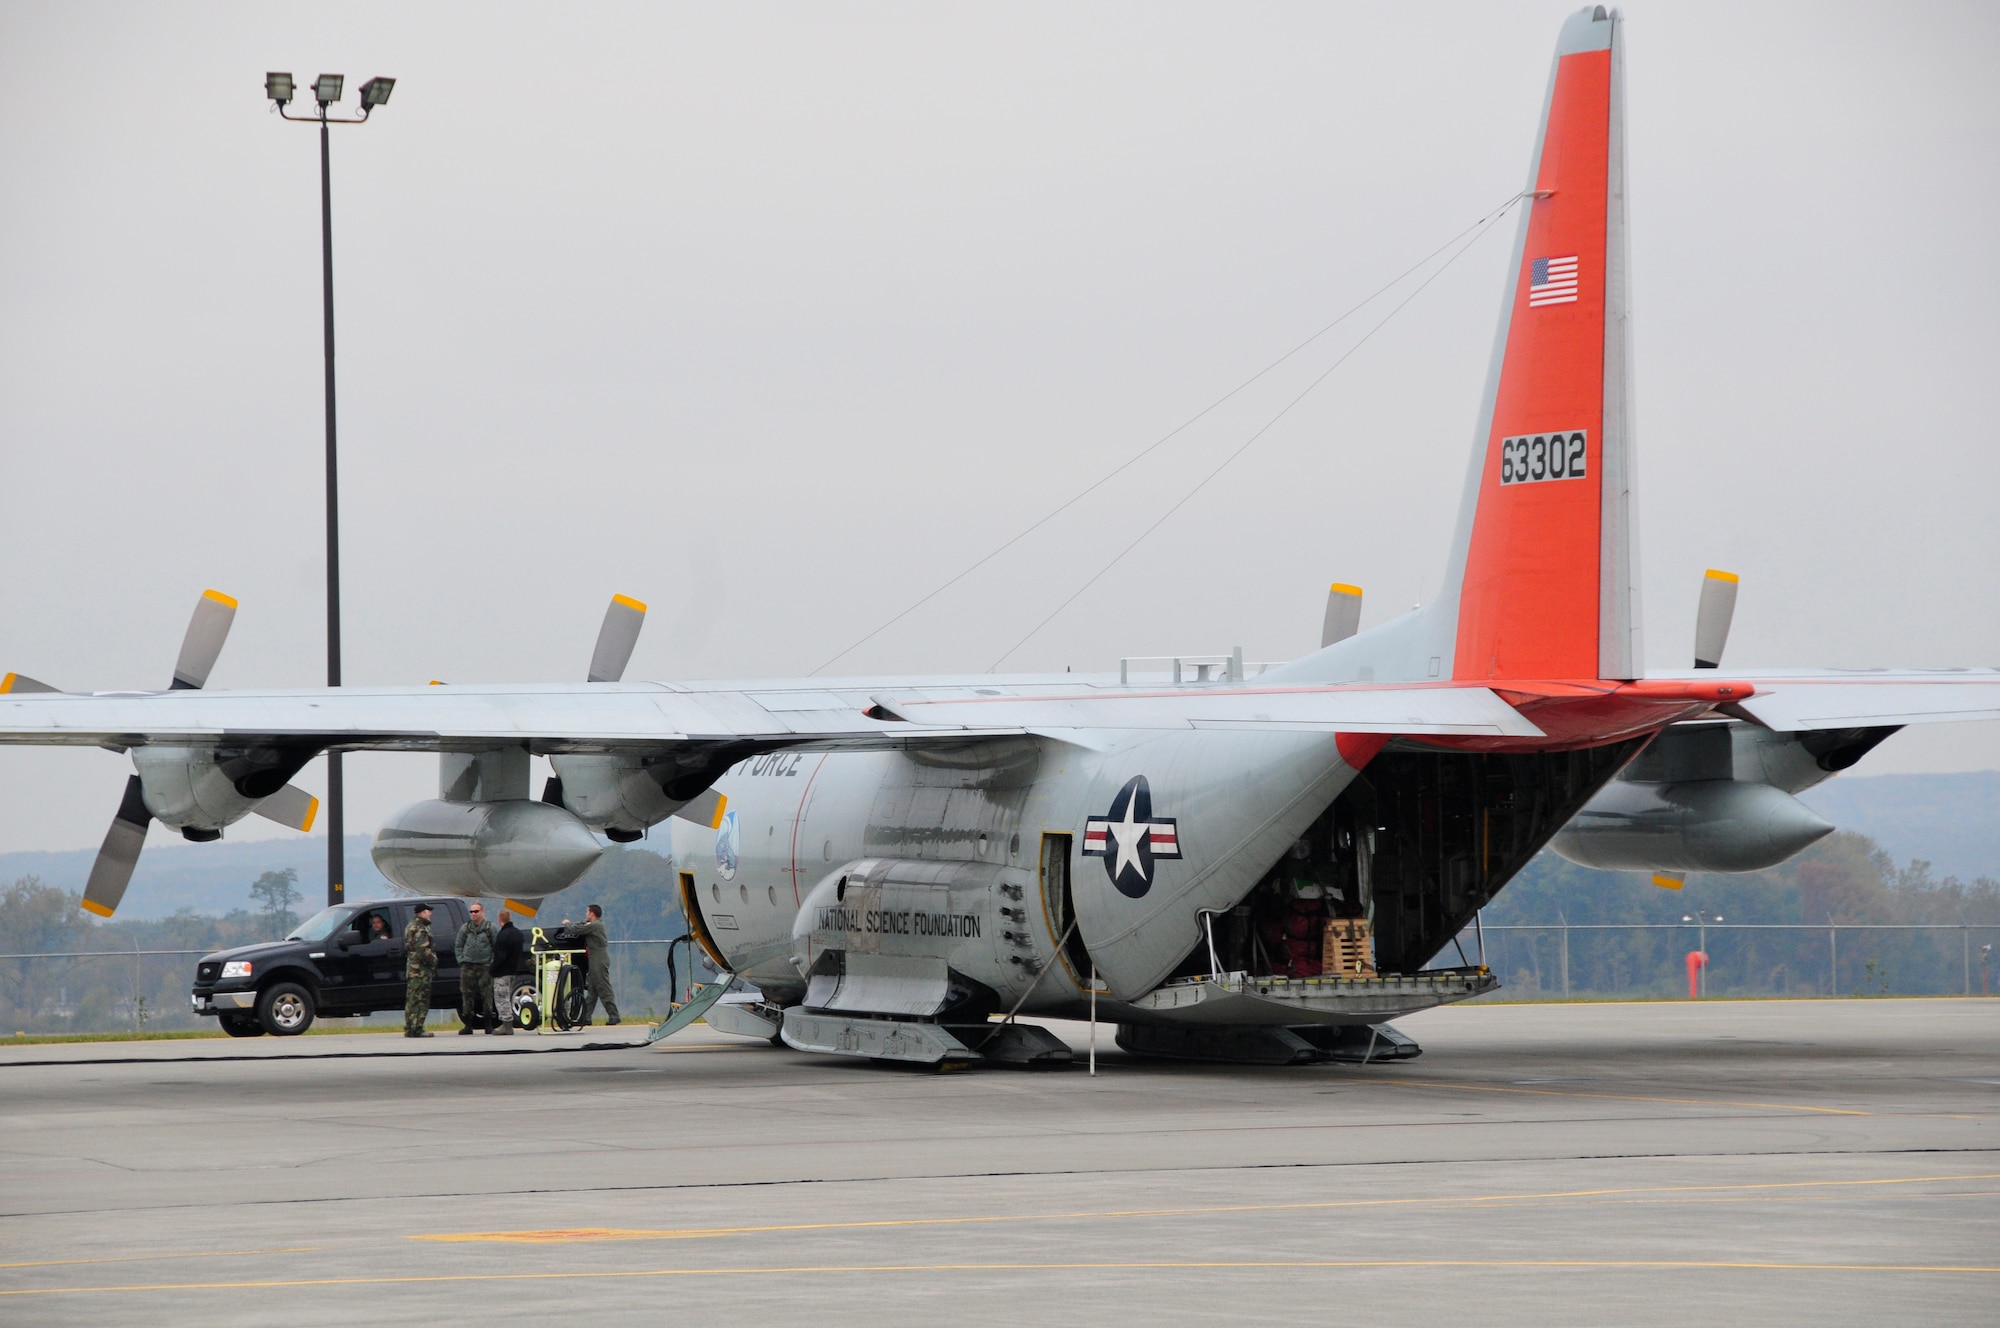 A ski equipped LC-130 Hercules finishes final preparation before leaving New York today and make the 11.000 mile journey to Antarctica in support of the United States Antarctica Program. The 109th Airlift Wing is part of the New York Air National Guard located in Schenectady New York.